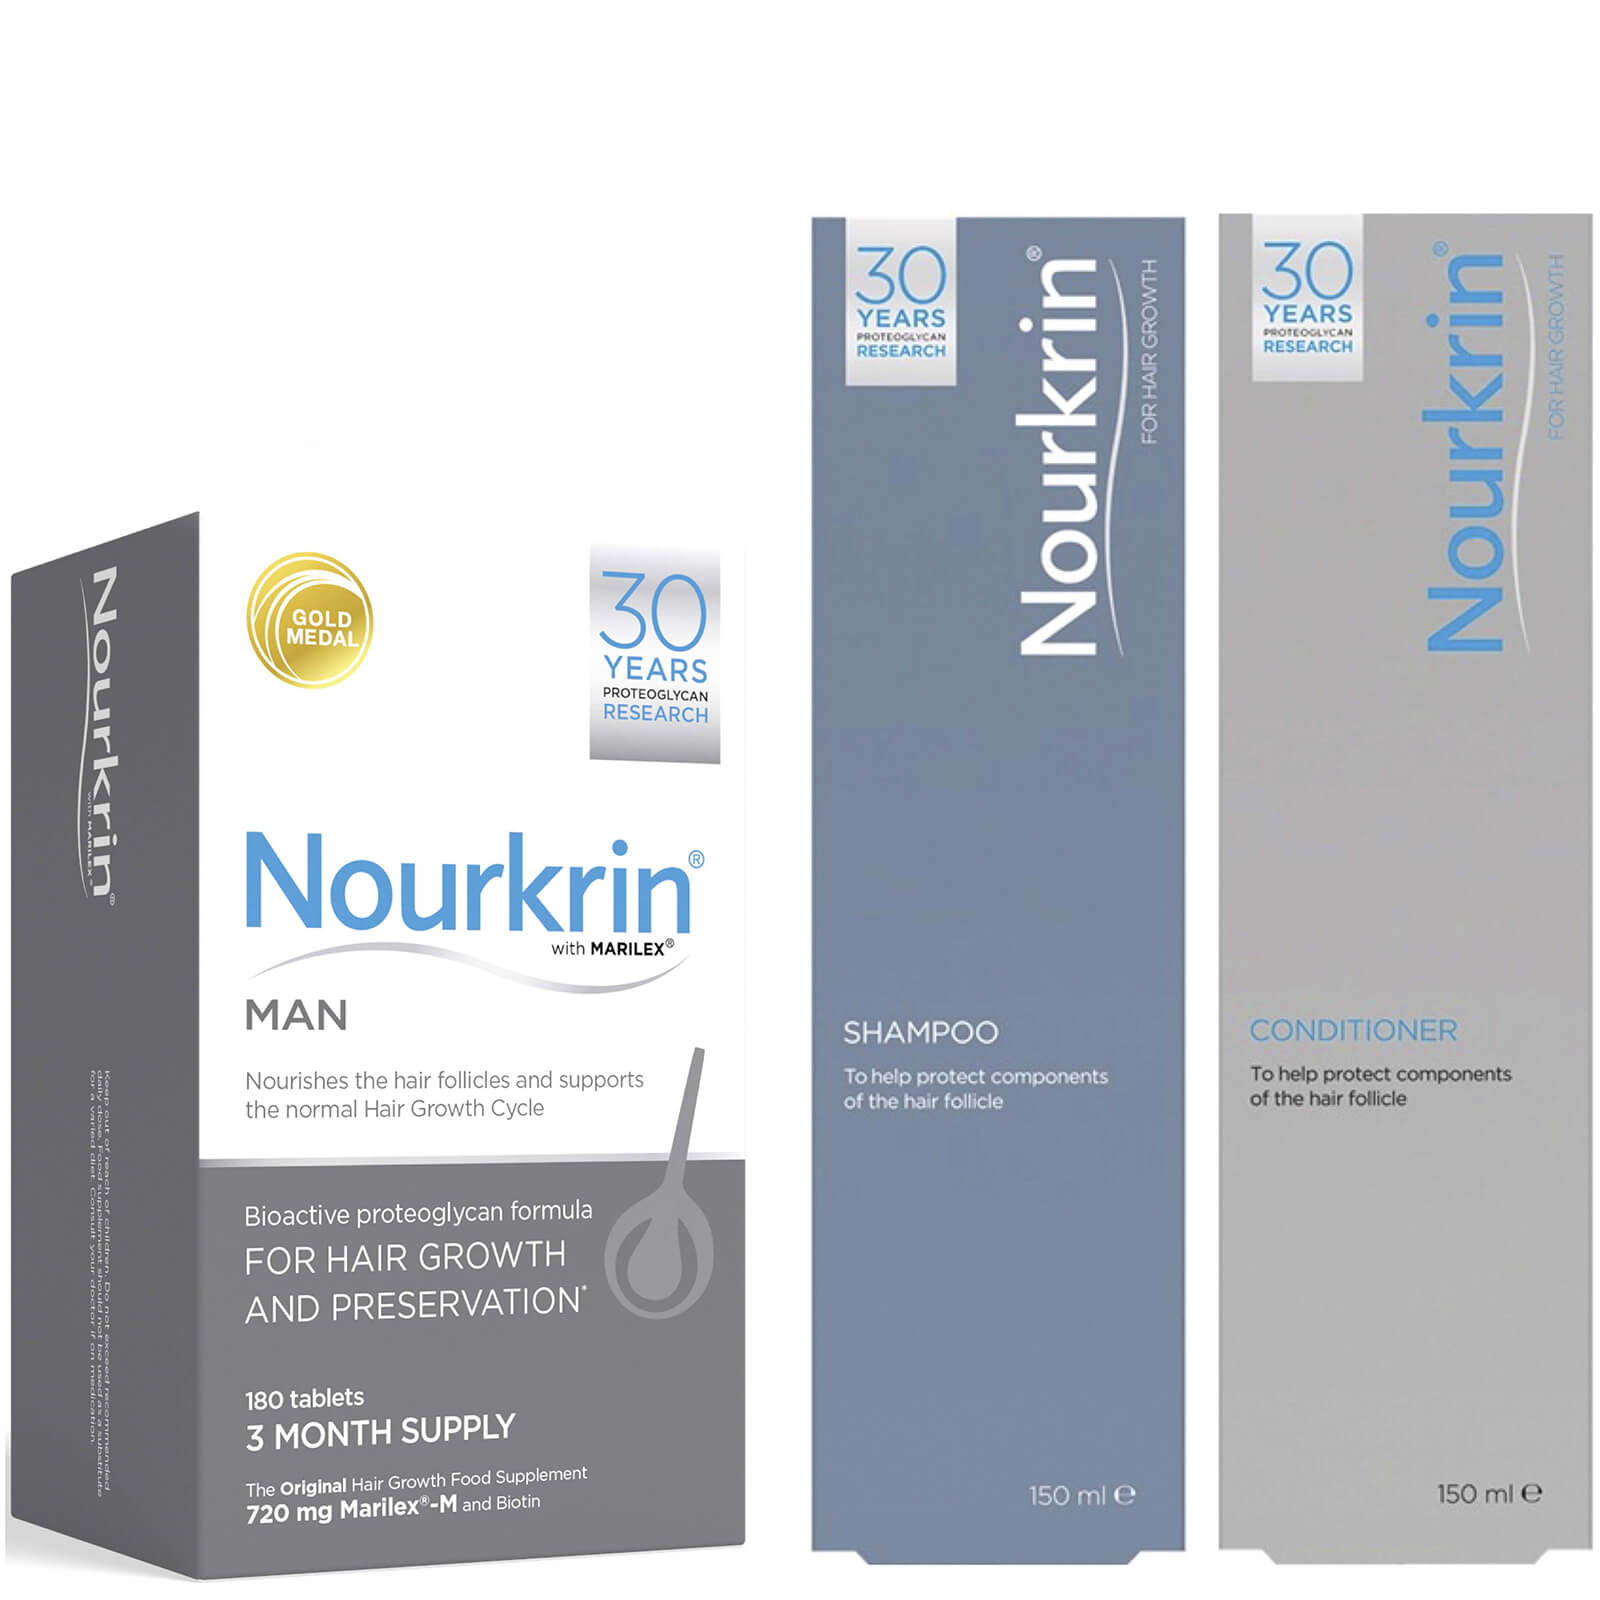 Nourkrin Man for Hair Preservation 6 Month Bundle with Shampoo and Conditioner x2 (Worth PS311.78)